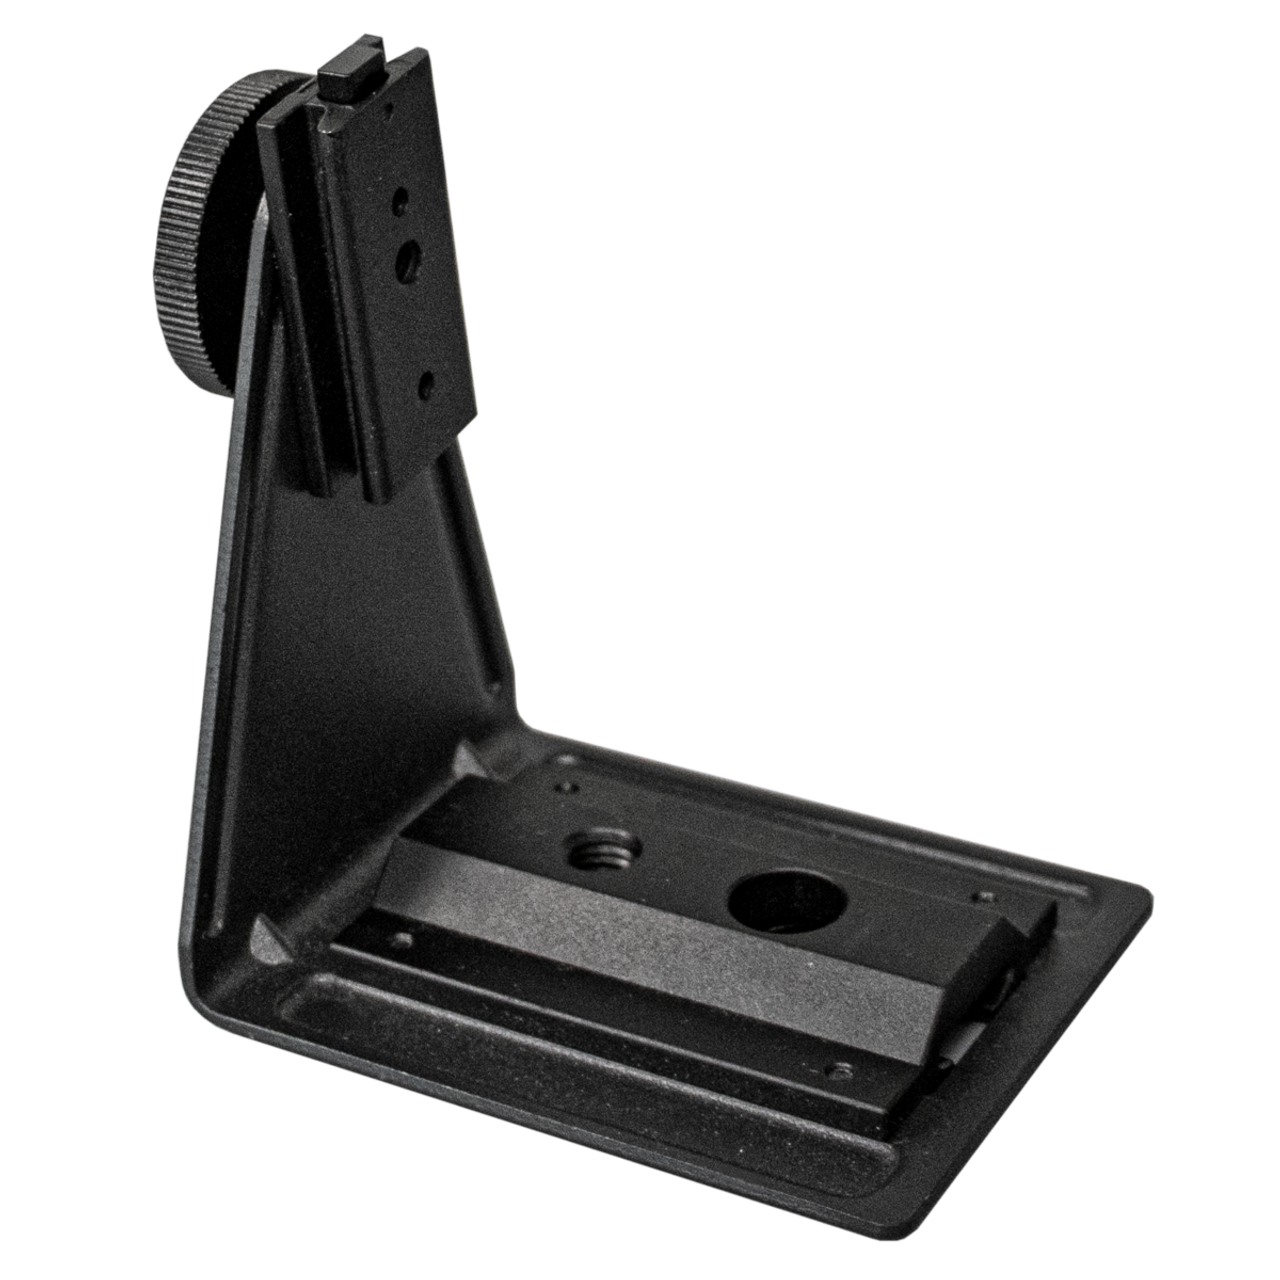 Astera PB15-BBR Brickbracket Stand and Hanging Mount with Airline Track and 1/4" Thread